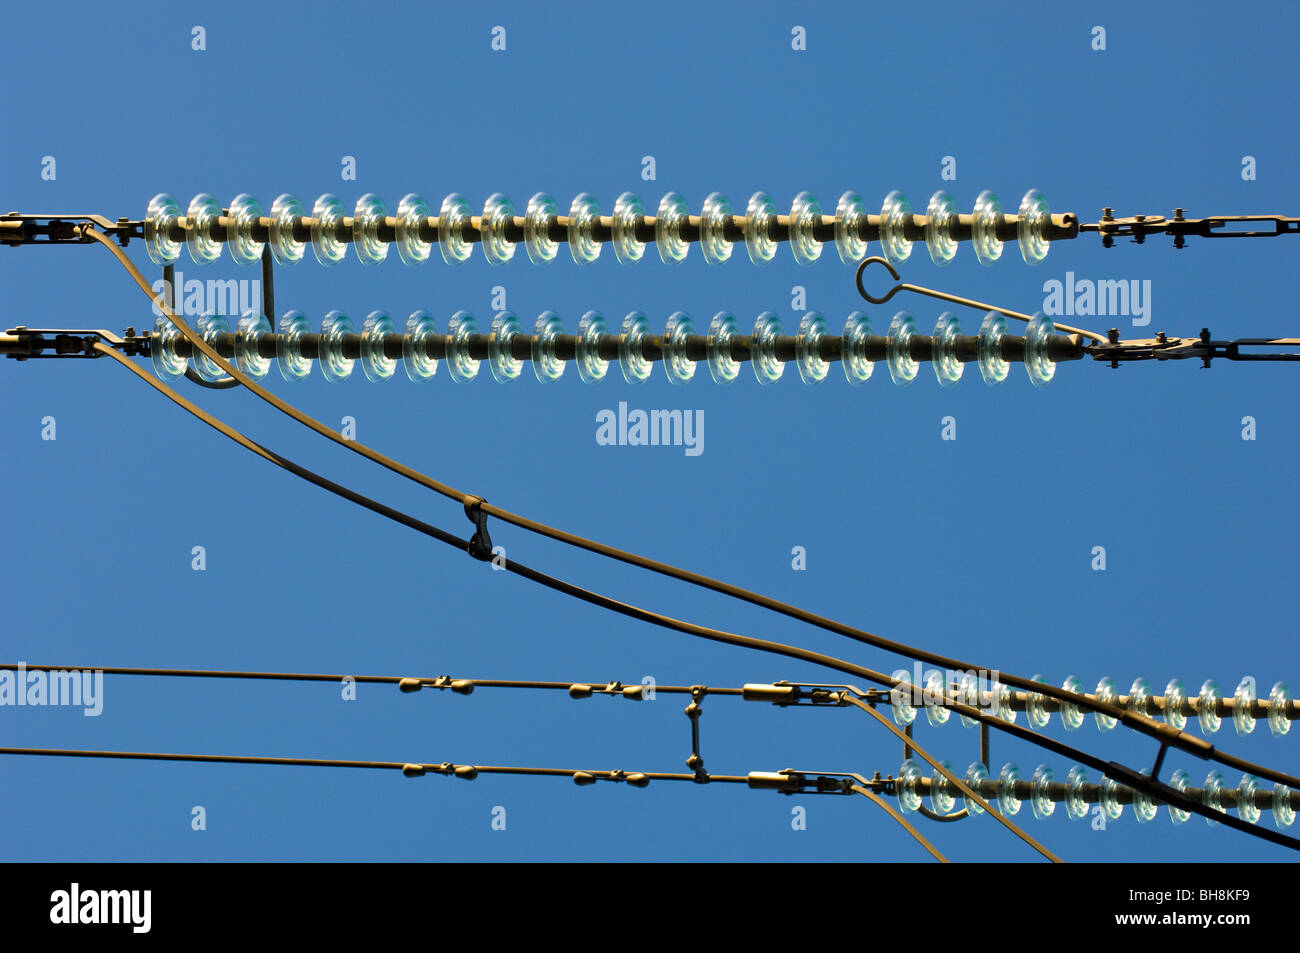 High voltage overhead cables transmission lines operating at 275kV with glass insulators. Stock Photo